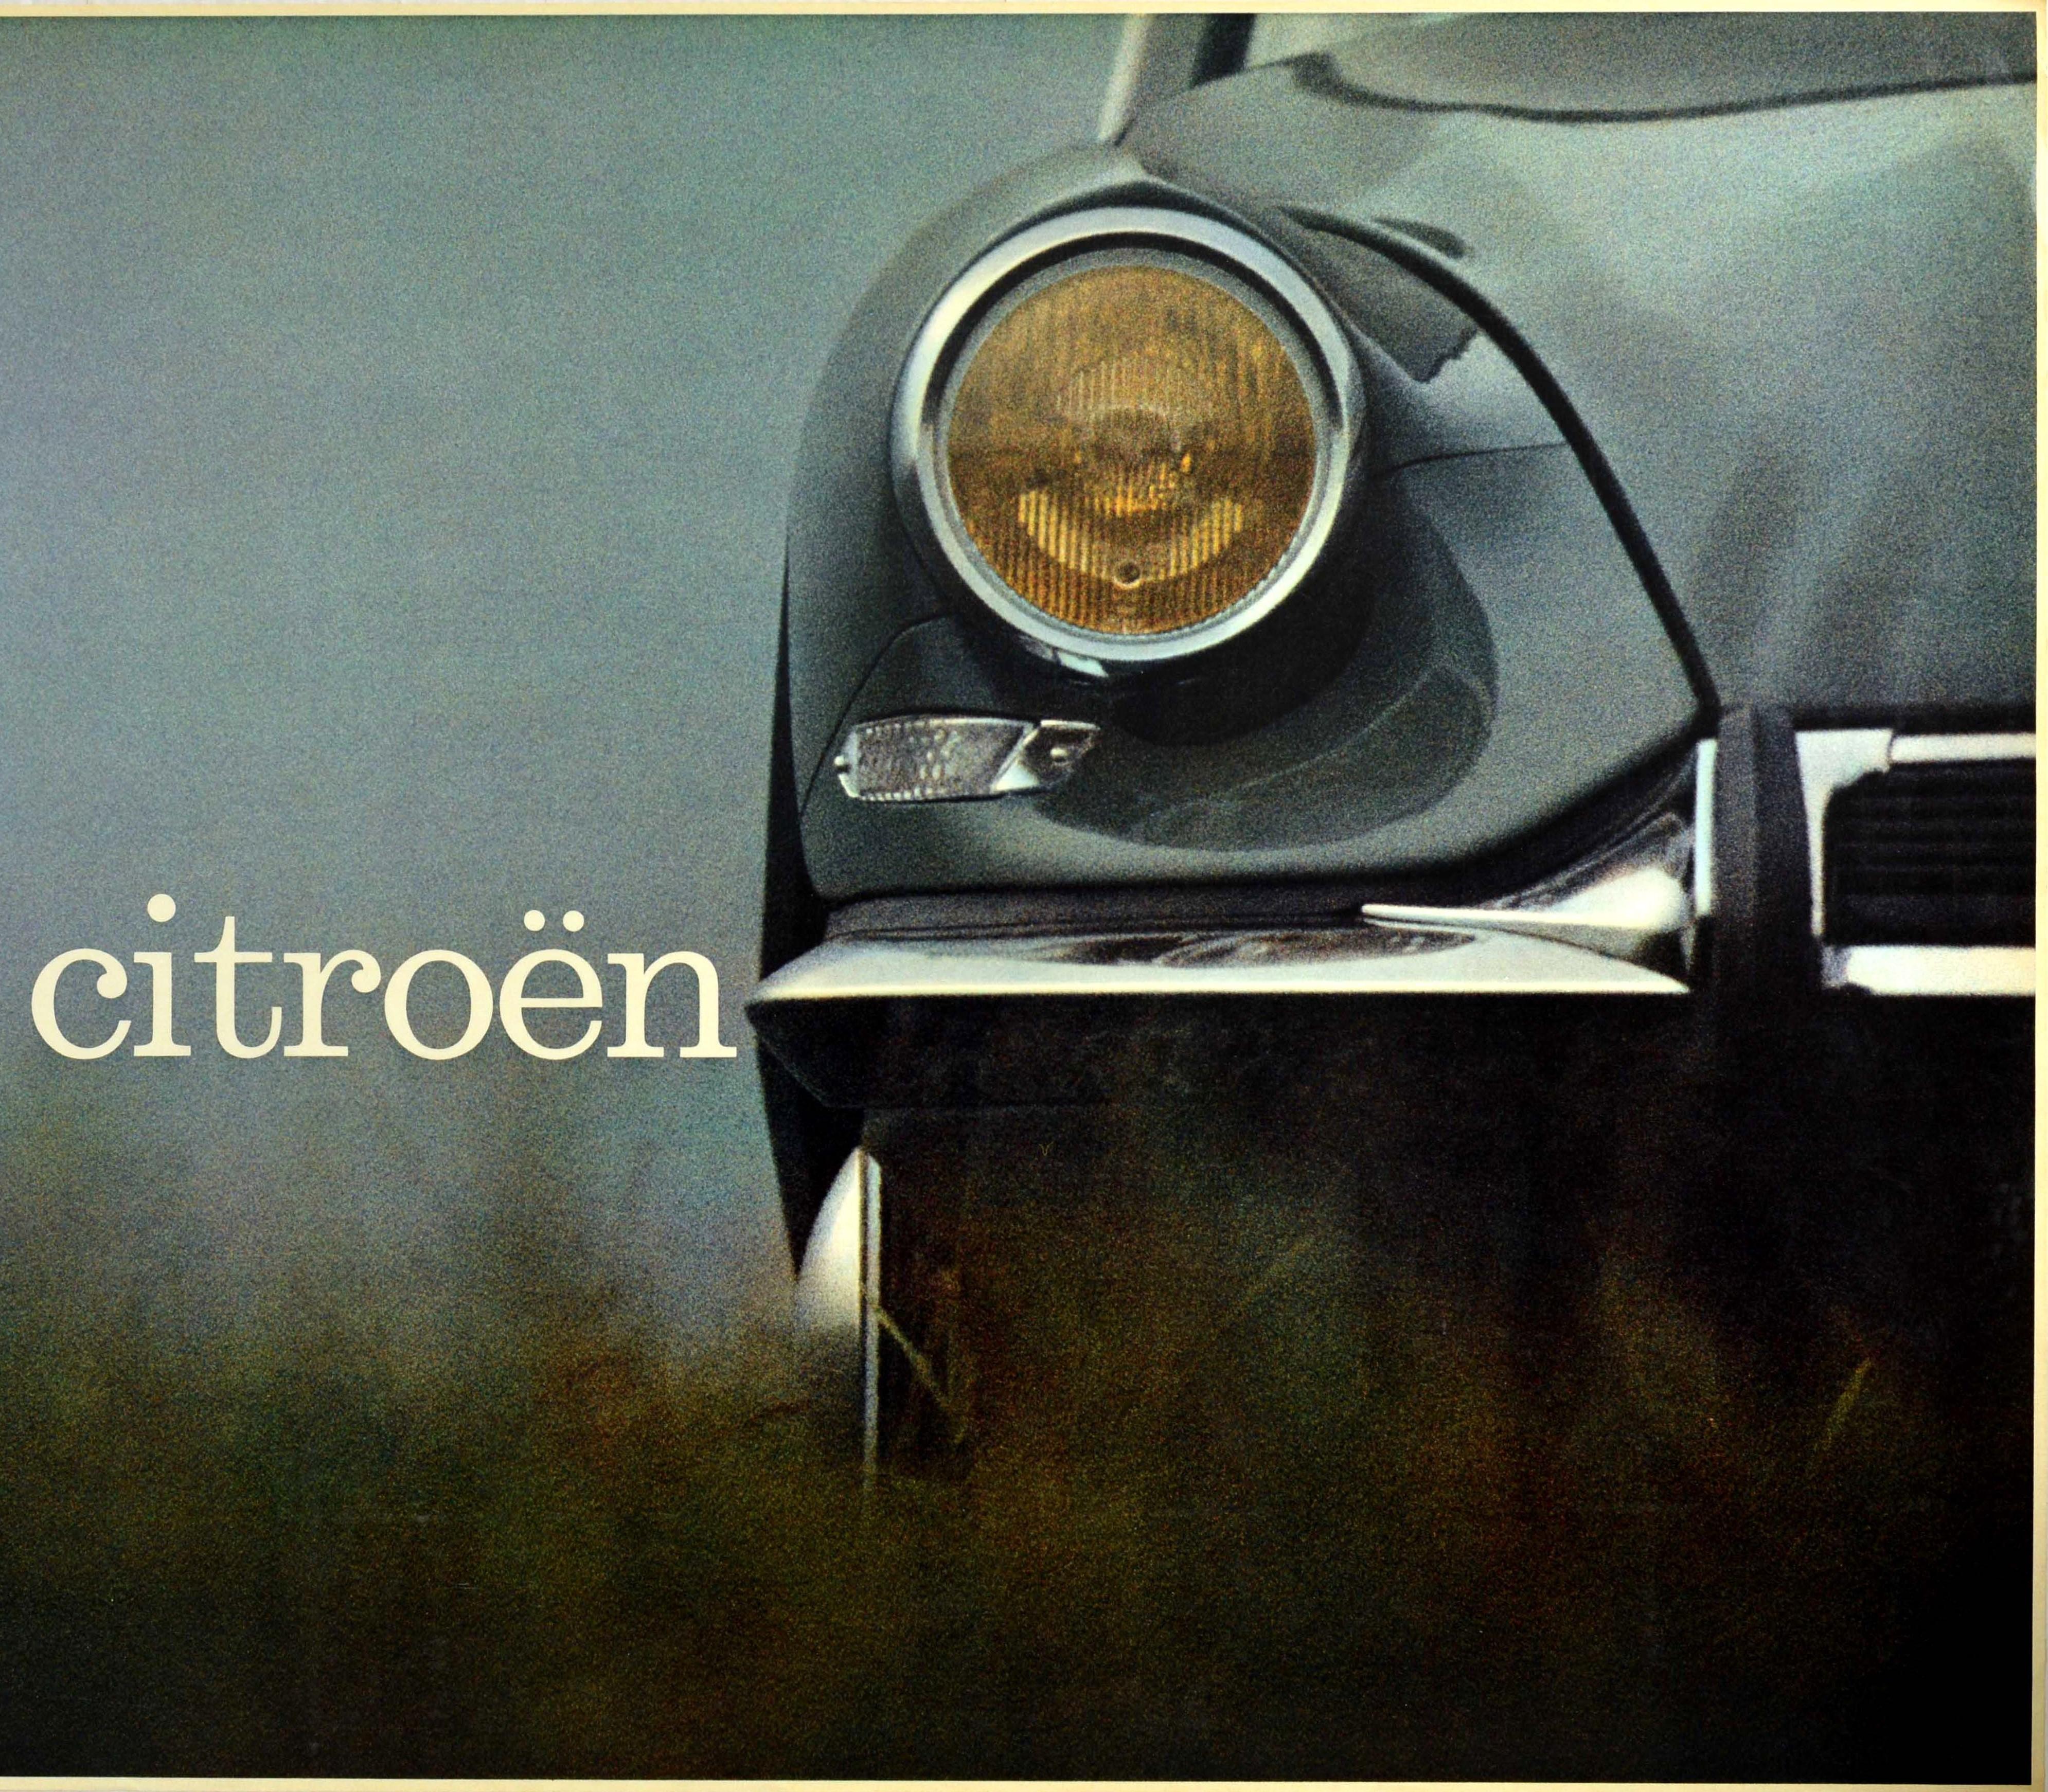 which artist is known for making a modified citroen ds car